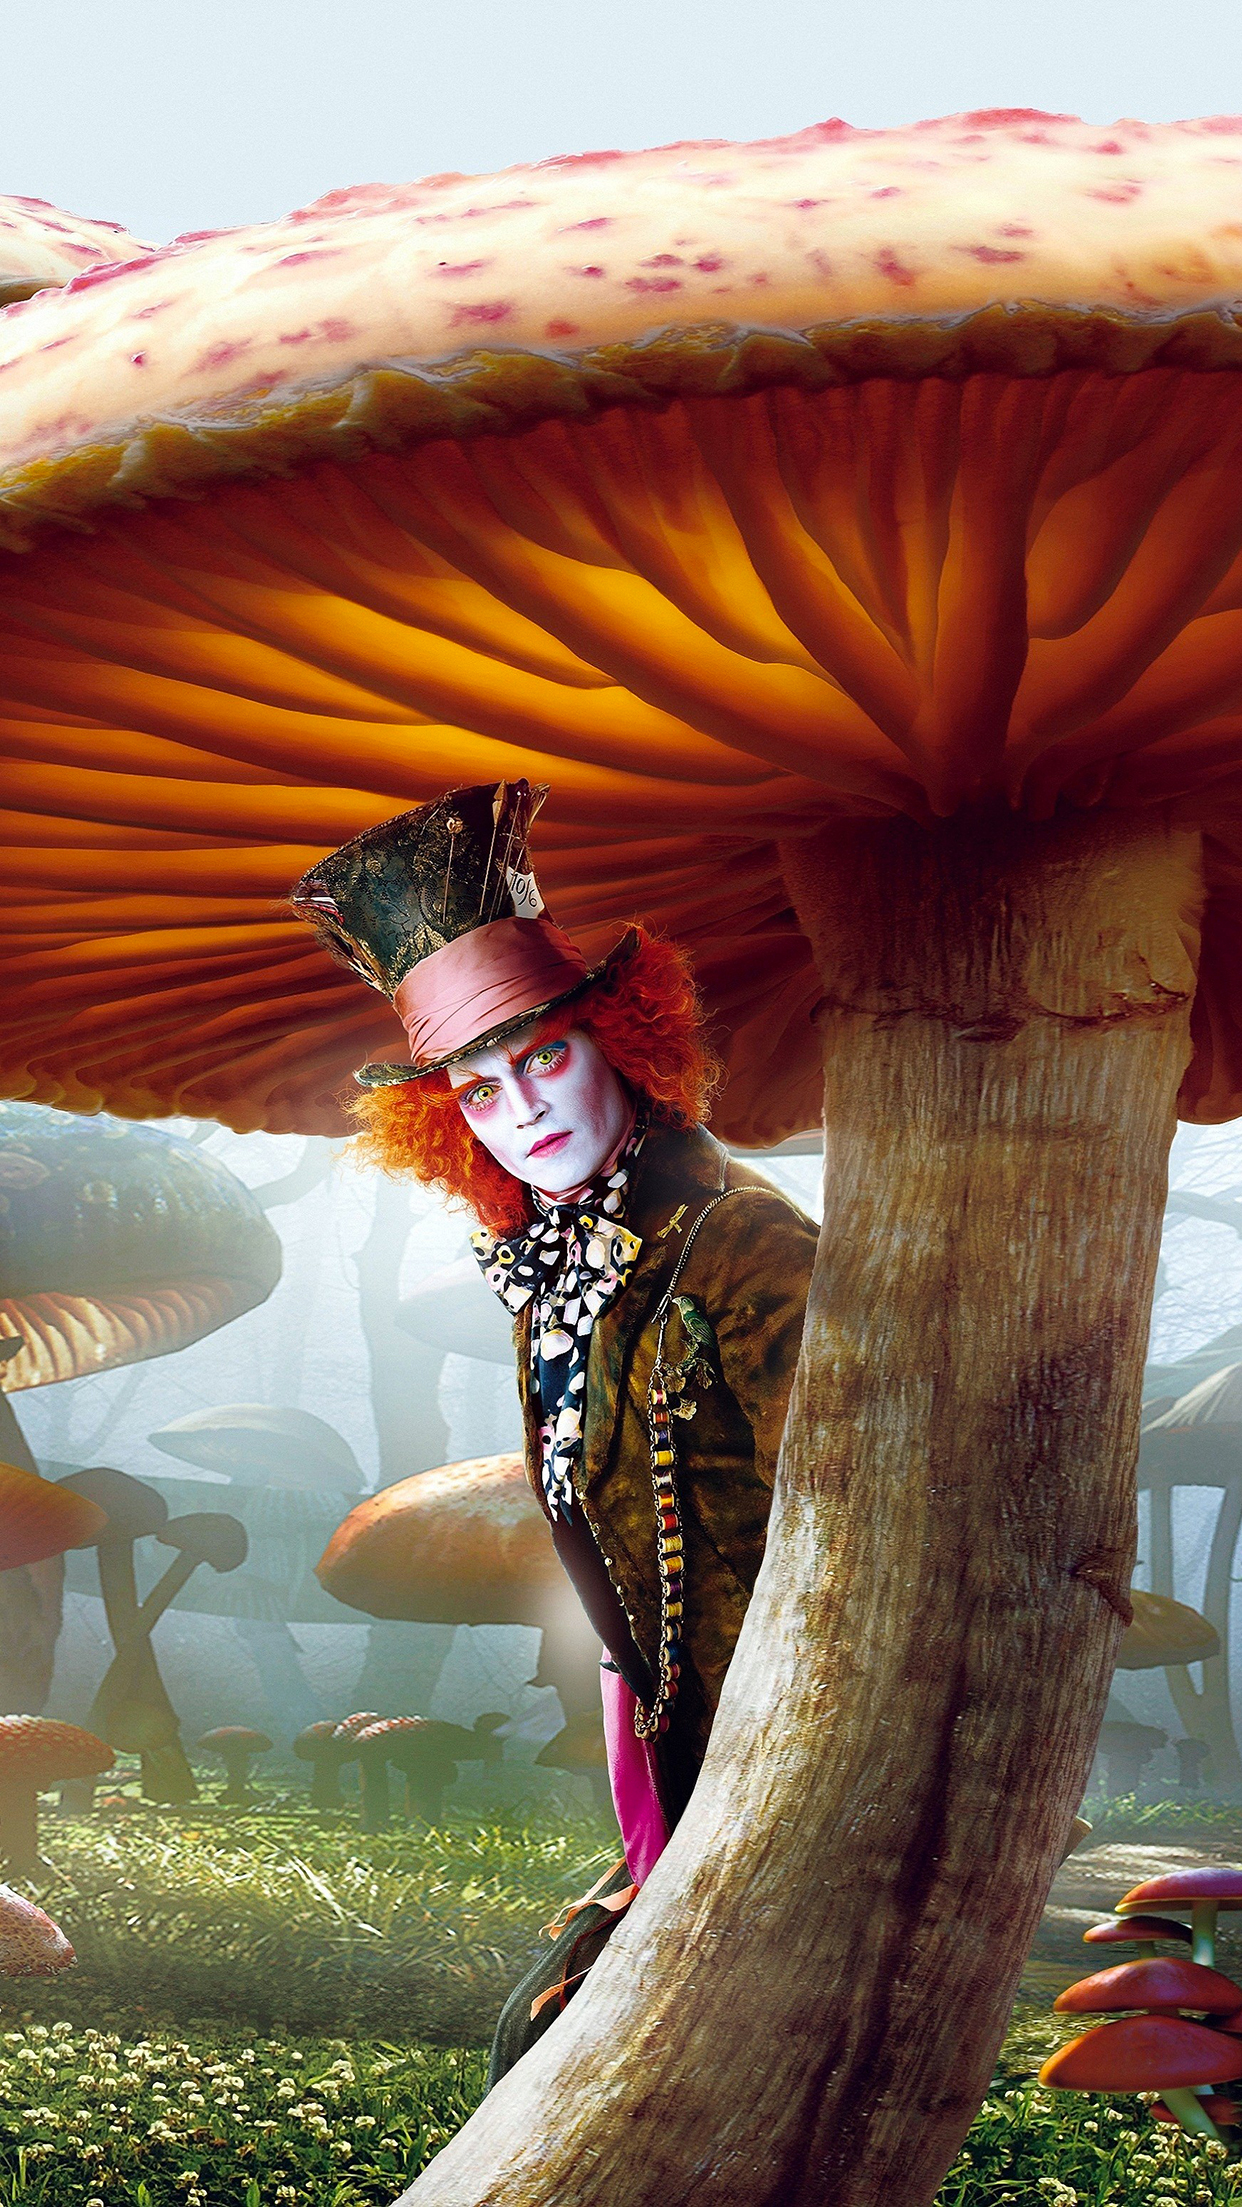 Alice in Wonderland depp mad hatter 3Wallpapers iPhone Parallax Les 3